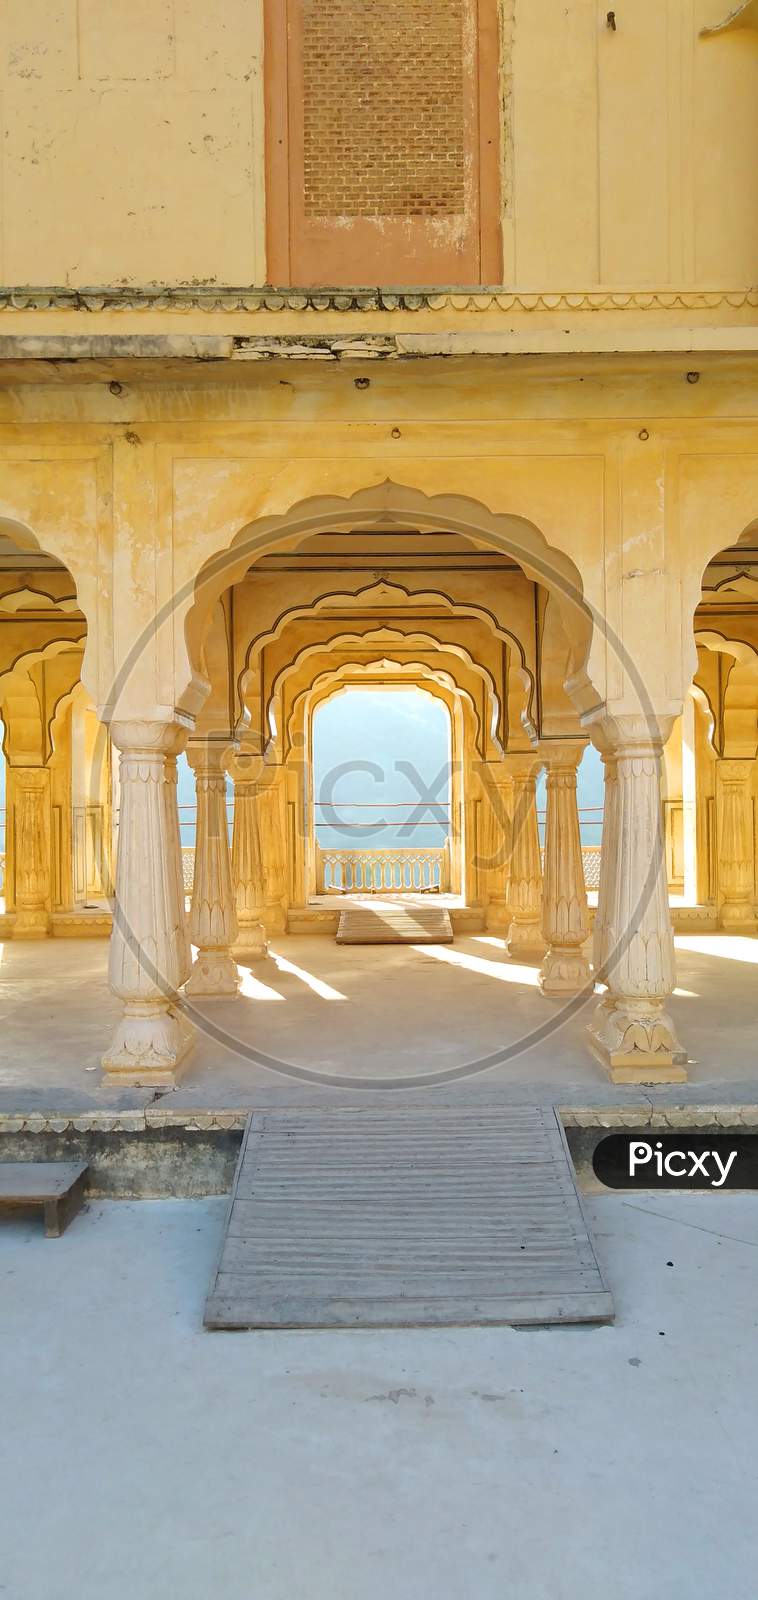 Amer Fort is a fort located in Amer, Rajasthan, India. Amer is a town with an area of 4 square kilometres located 11 kilometres from Jaipur